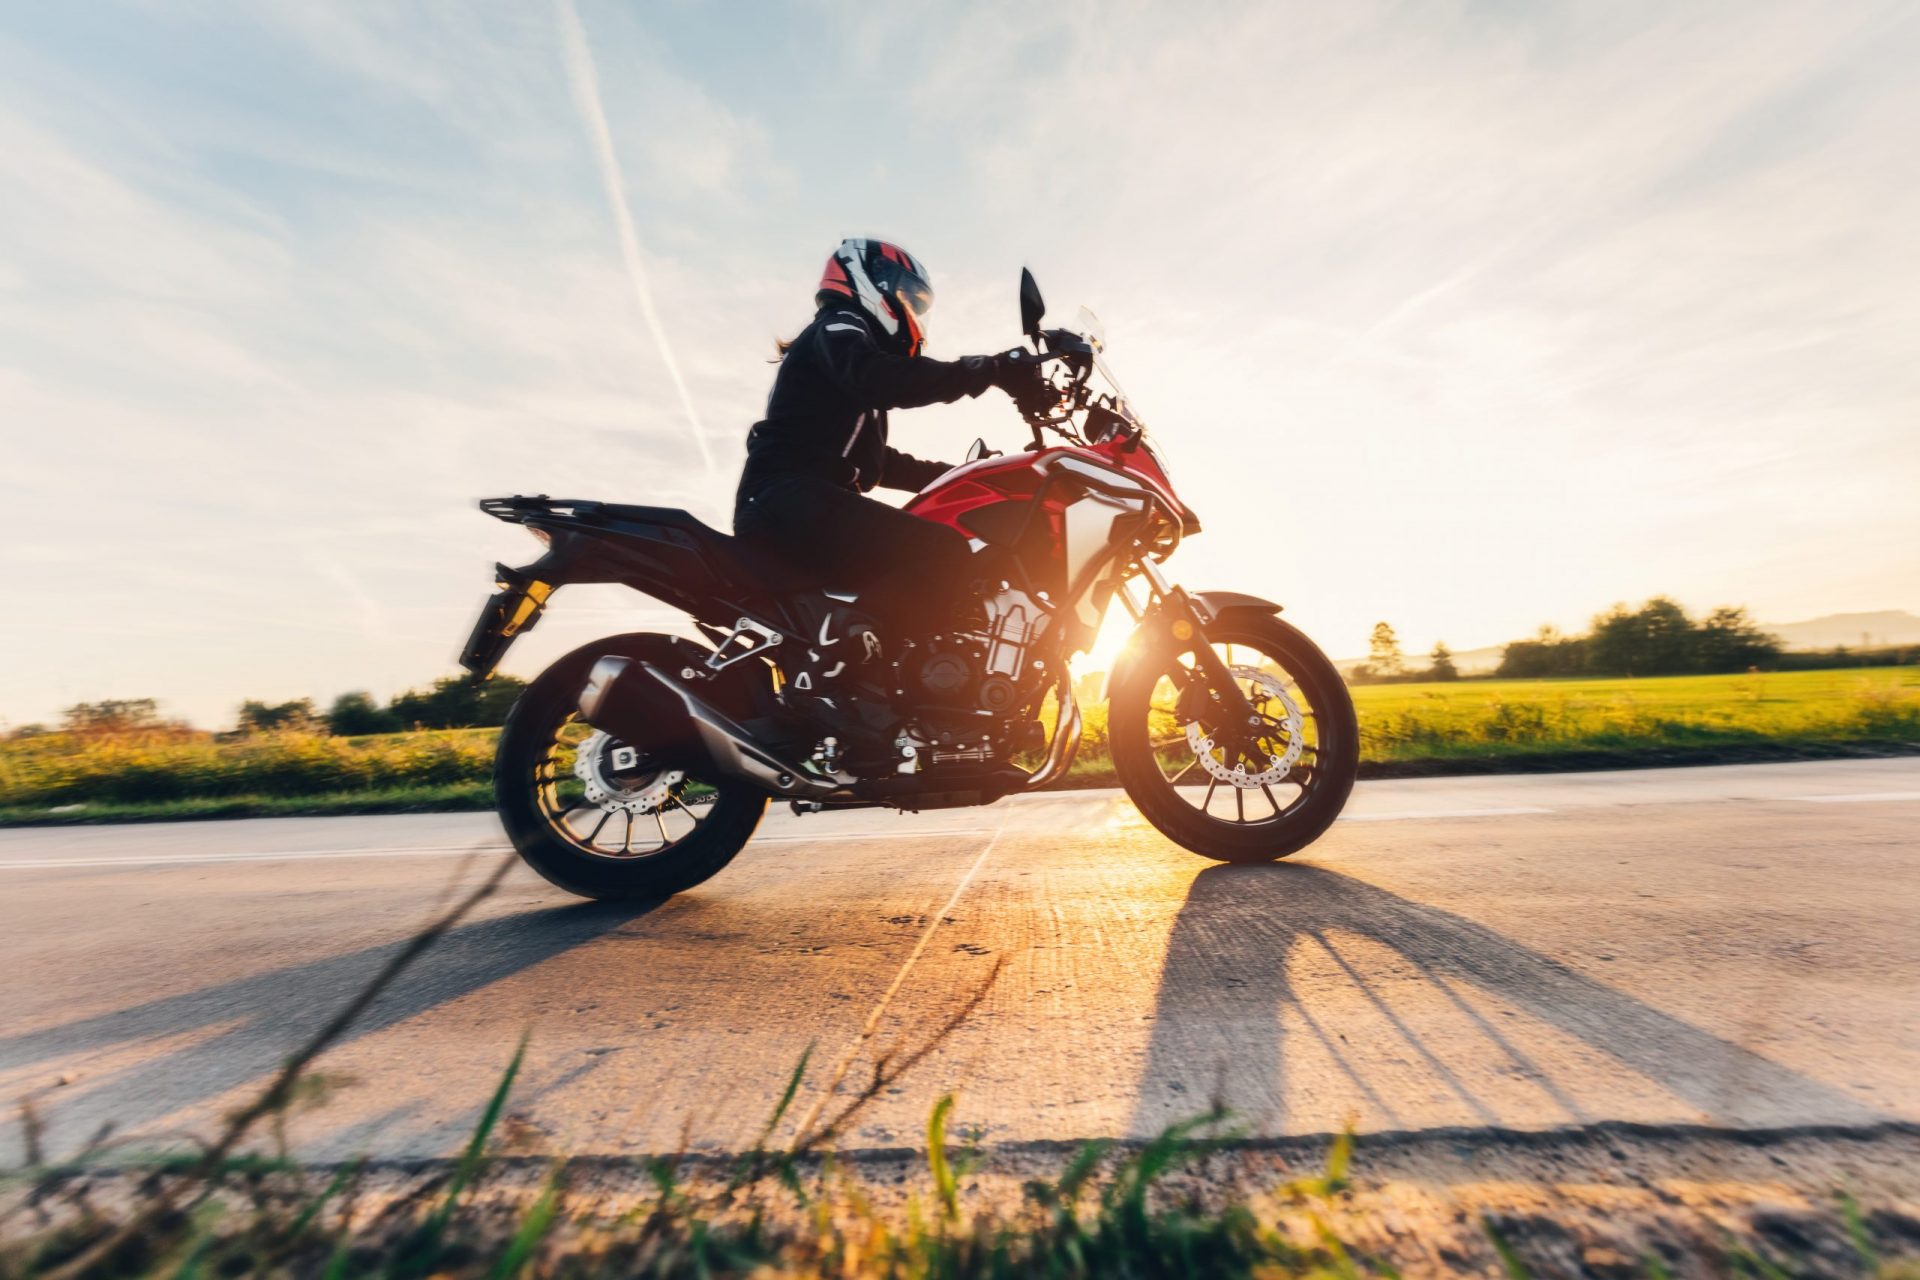 Before You Ride: Motorcycle Safety Tips